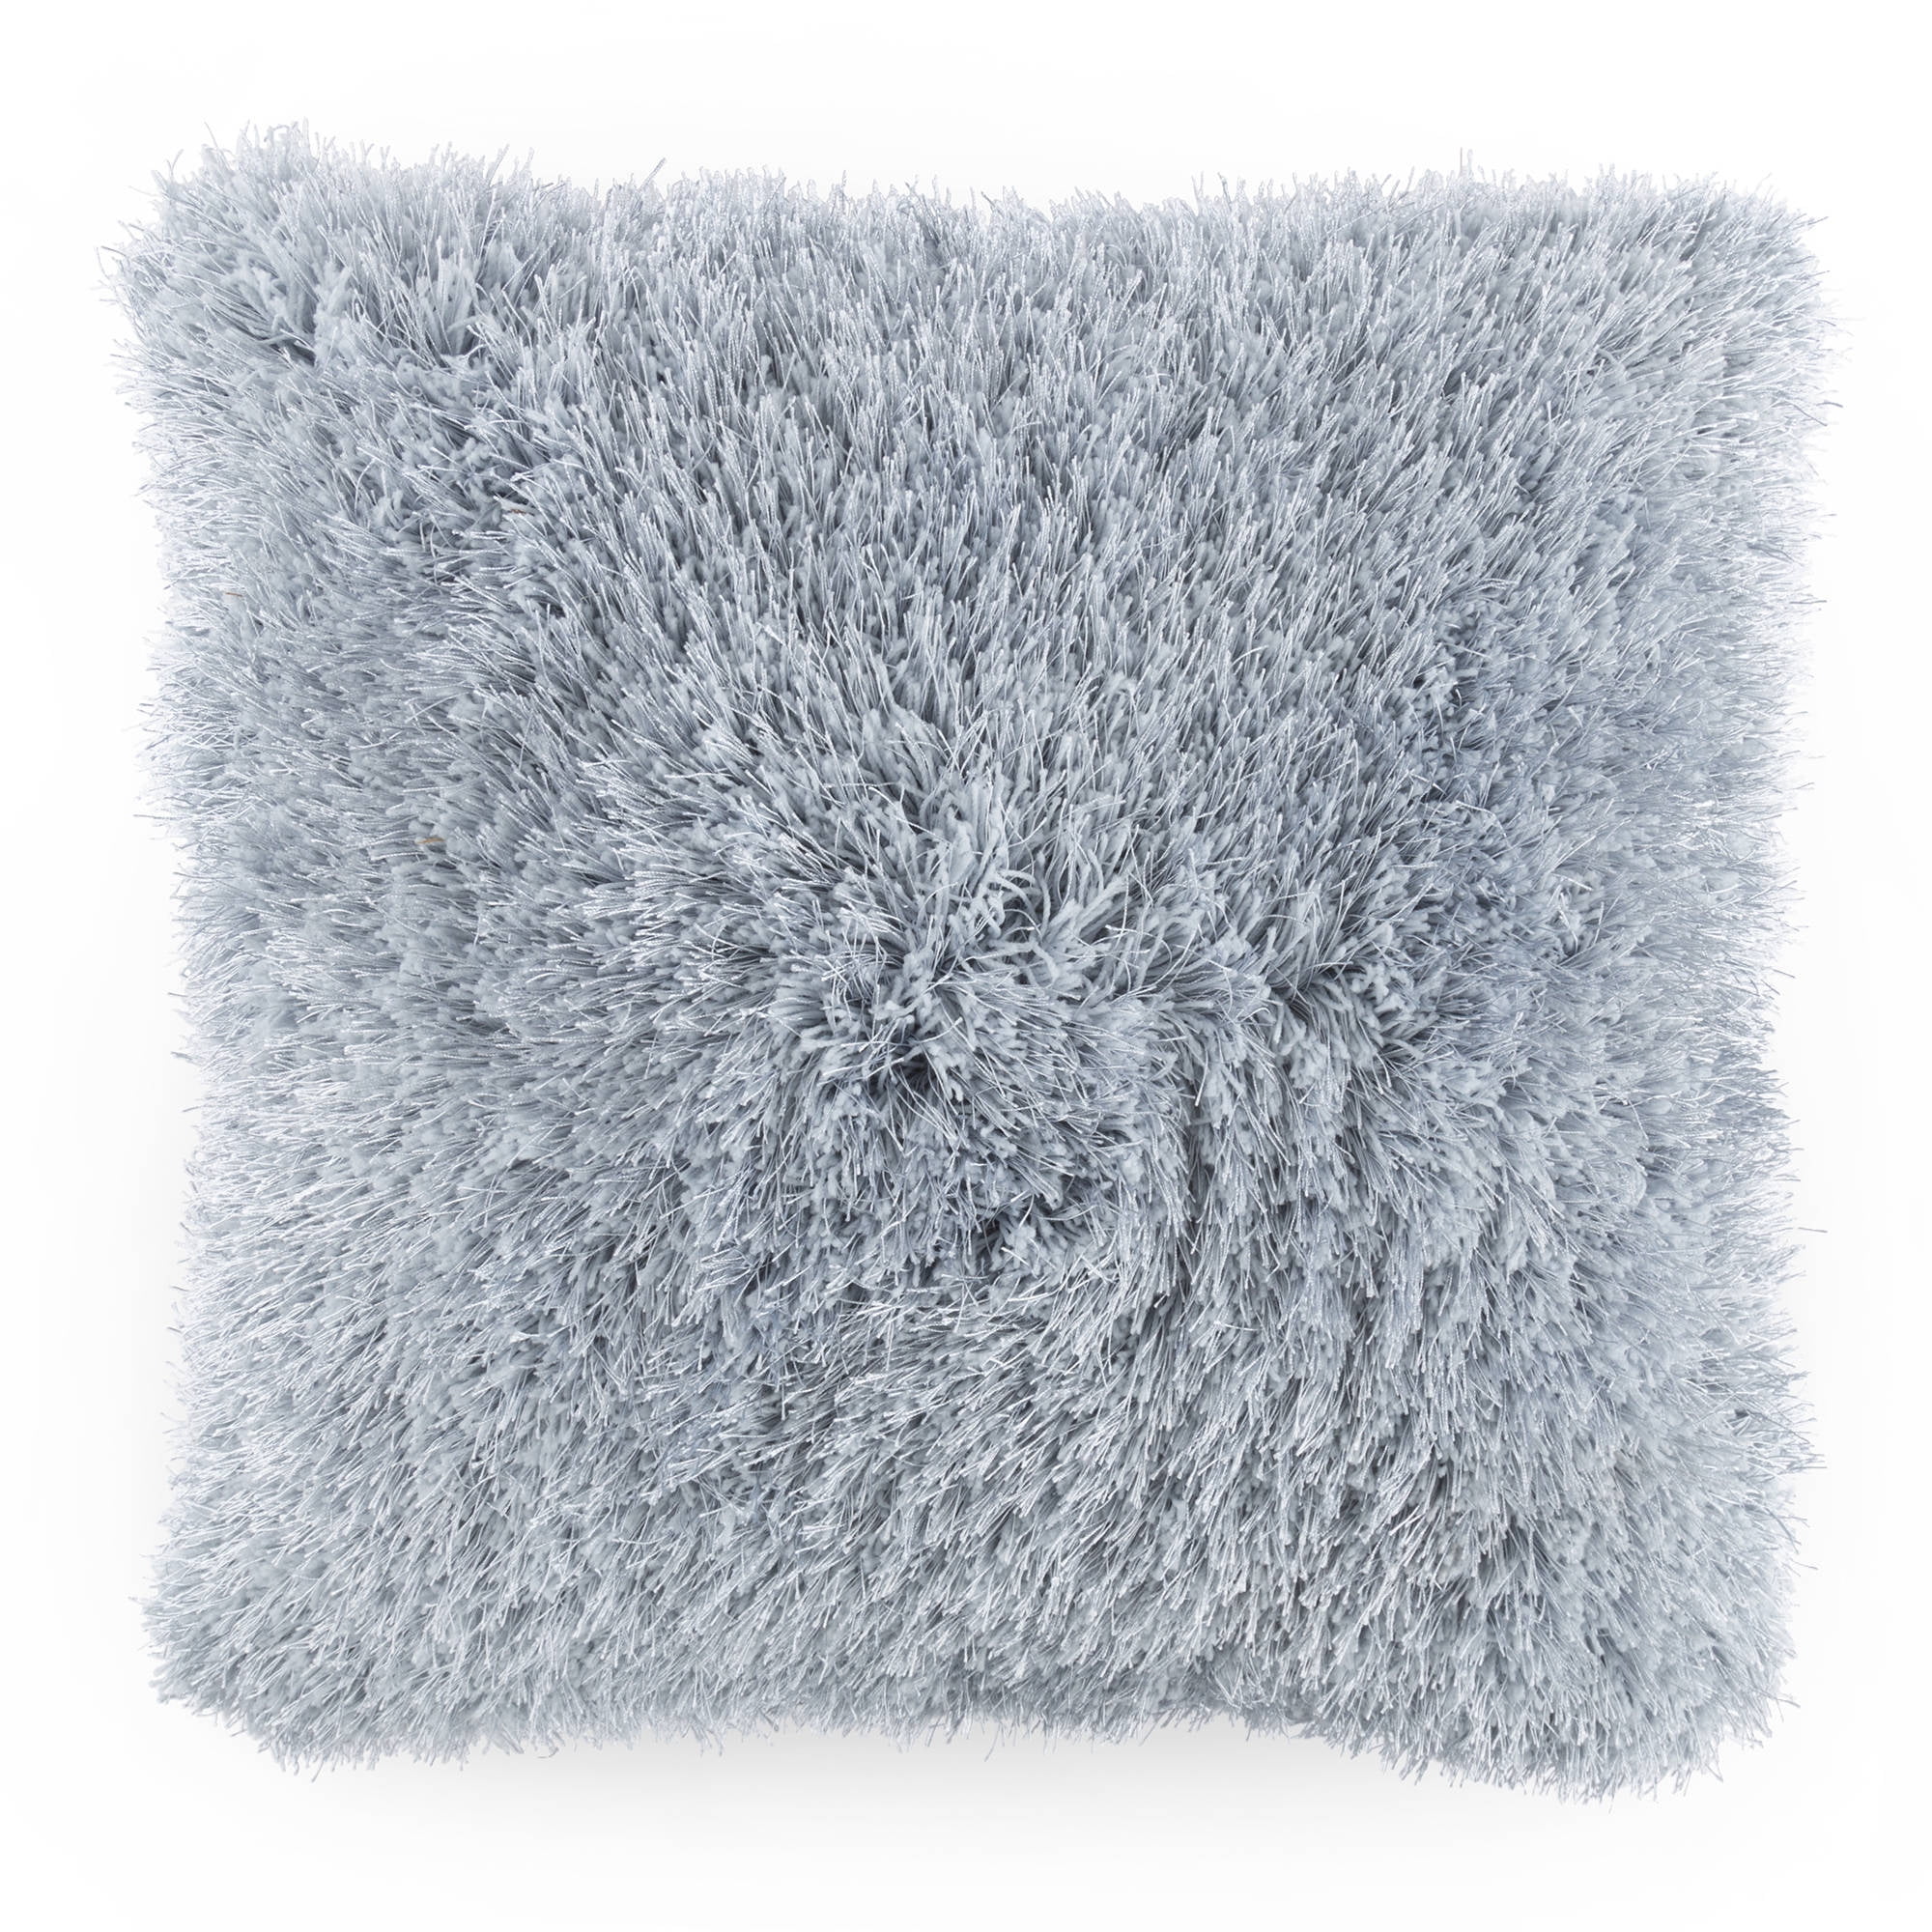 Oversized Floor or Throw Pillow Square Luxury Plush- Shag Faux Fur Glam  Decor Cushion for Bedroom Living Room or Dorm by Hastings Home (Grey)